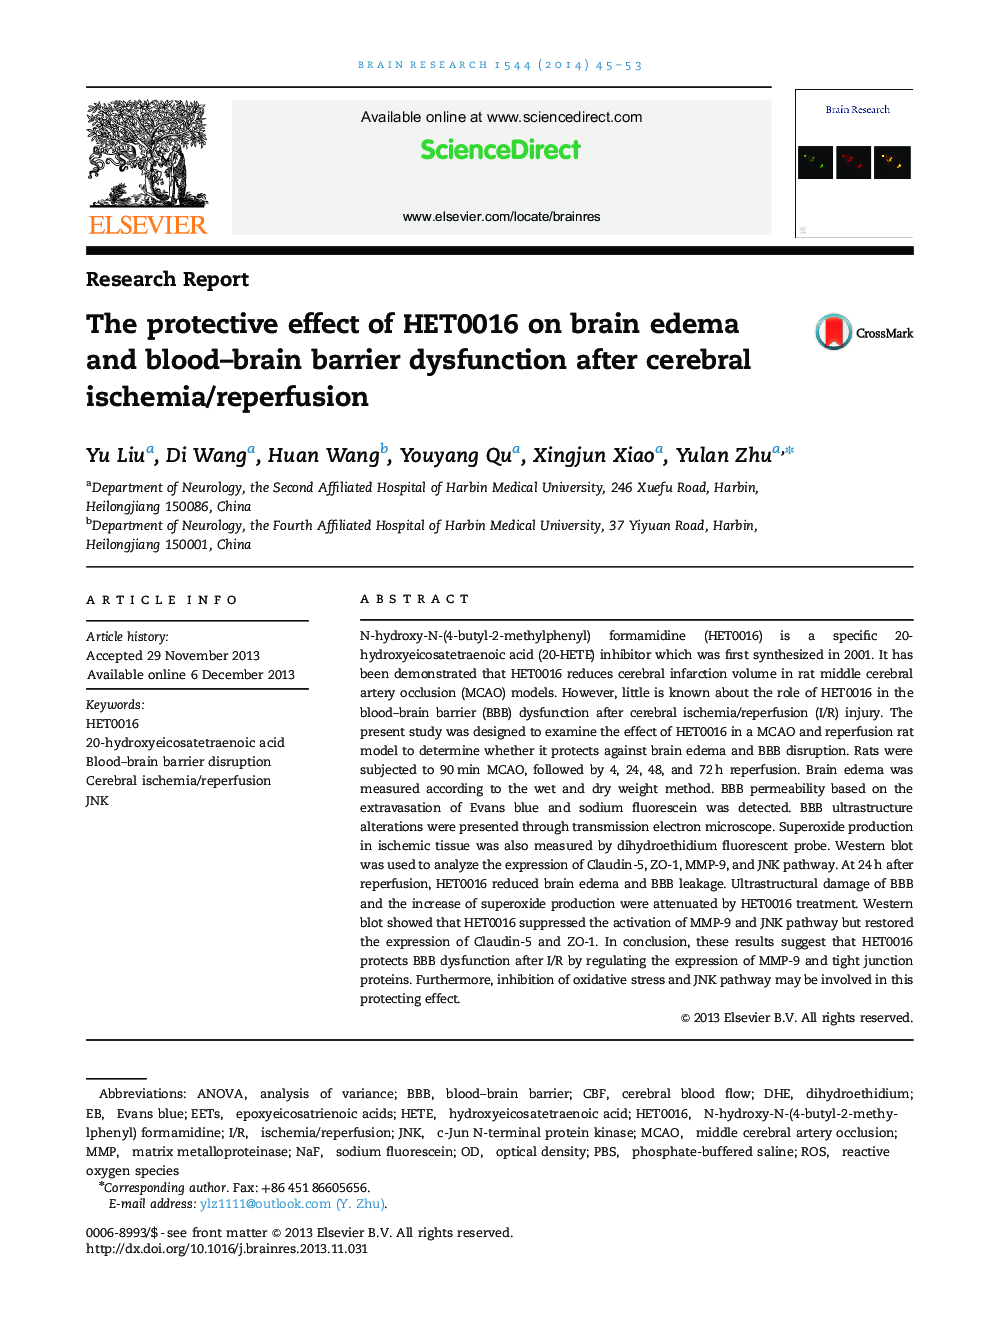 The protective effect of HET0016 on brain edema and blood–brain barrier dysfunction after cerebral ischemia/reperfusion